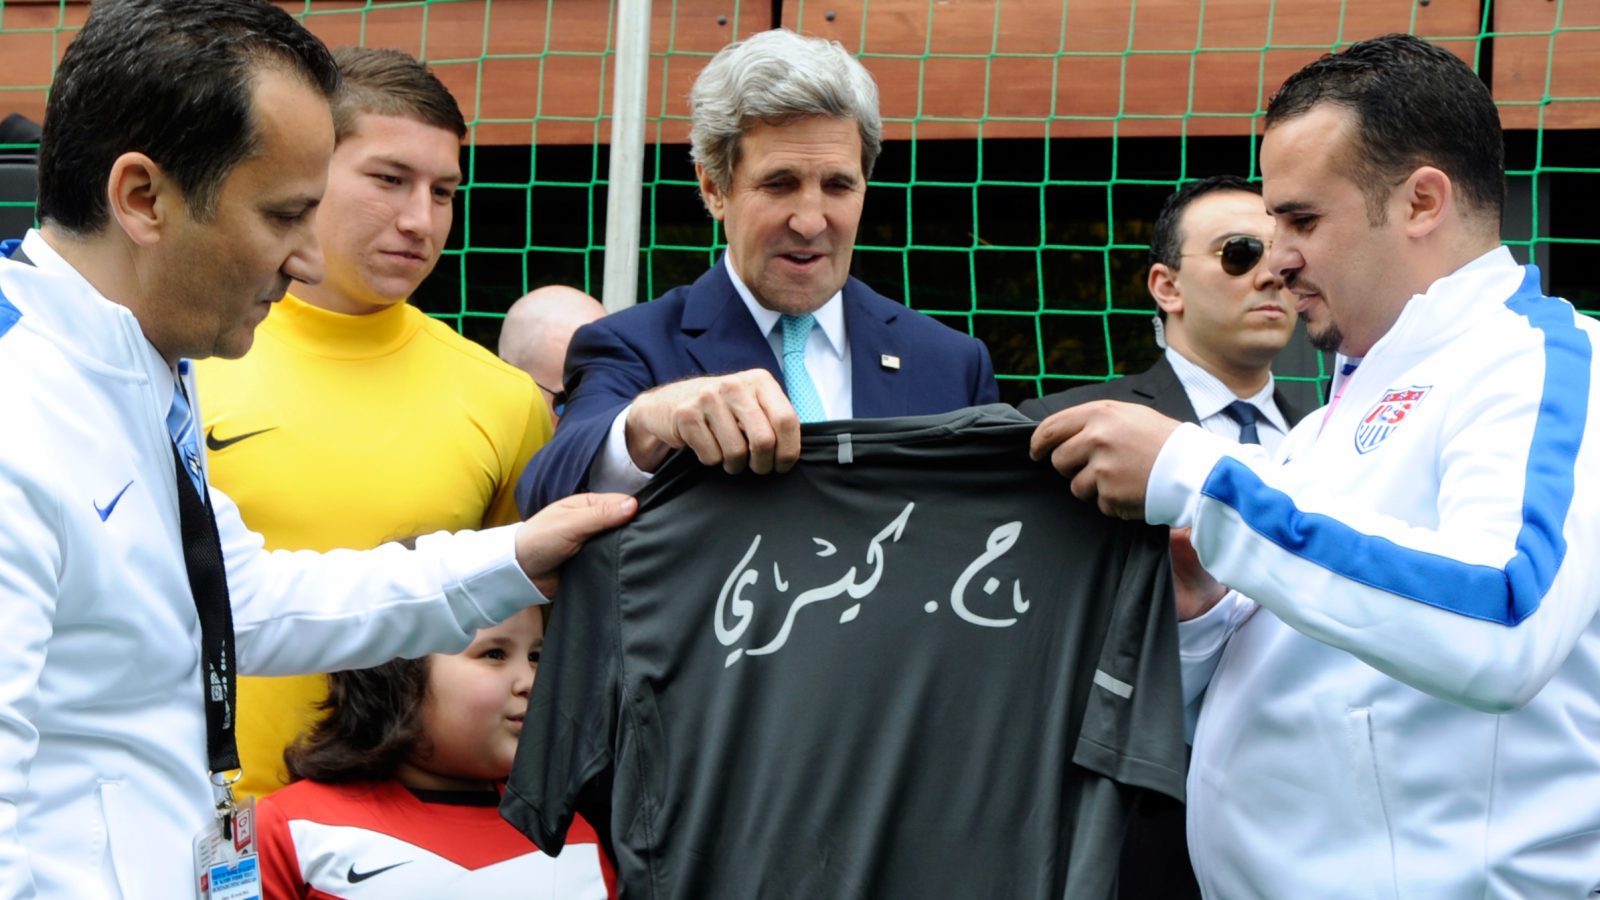 Three men holding a tshirt, one of them is a US Sec of State surrounded by sports executives from Algiers